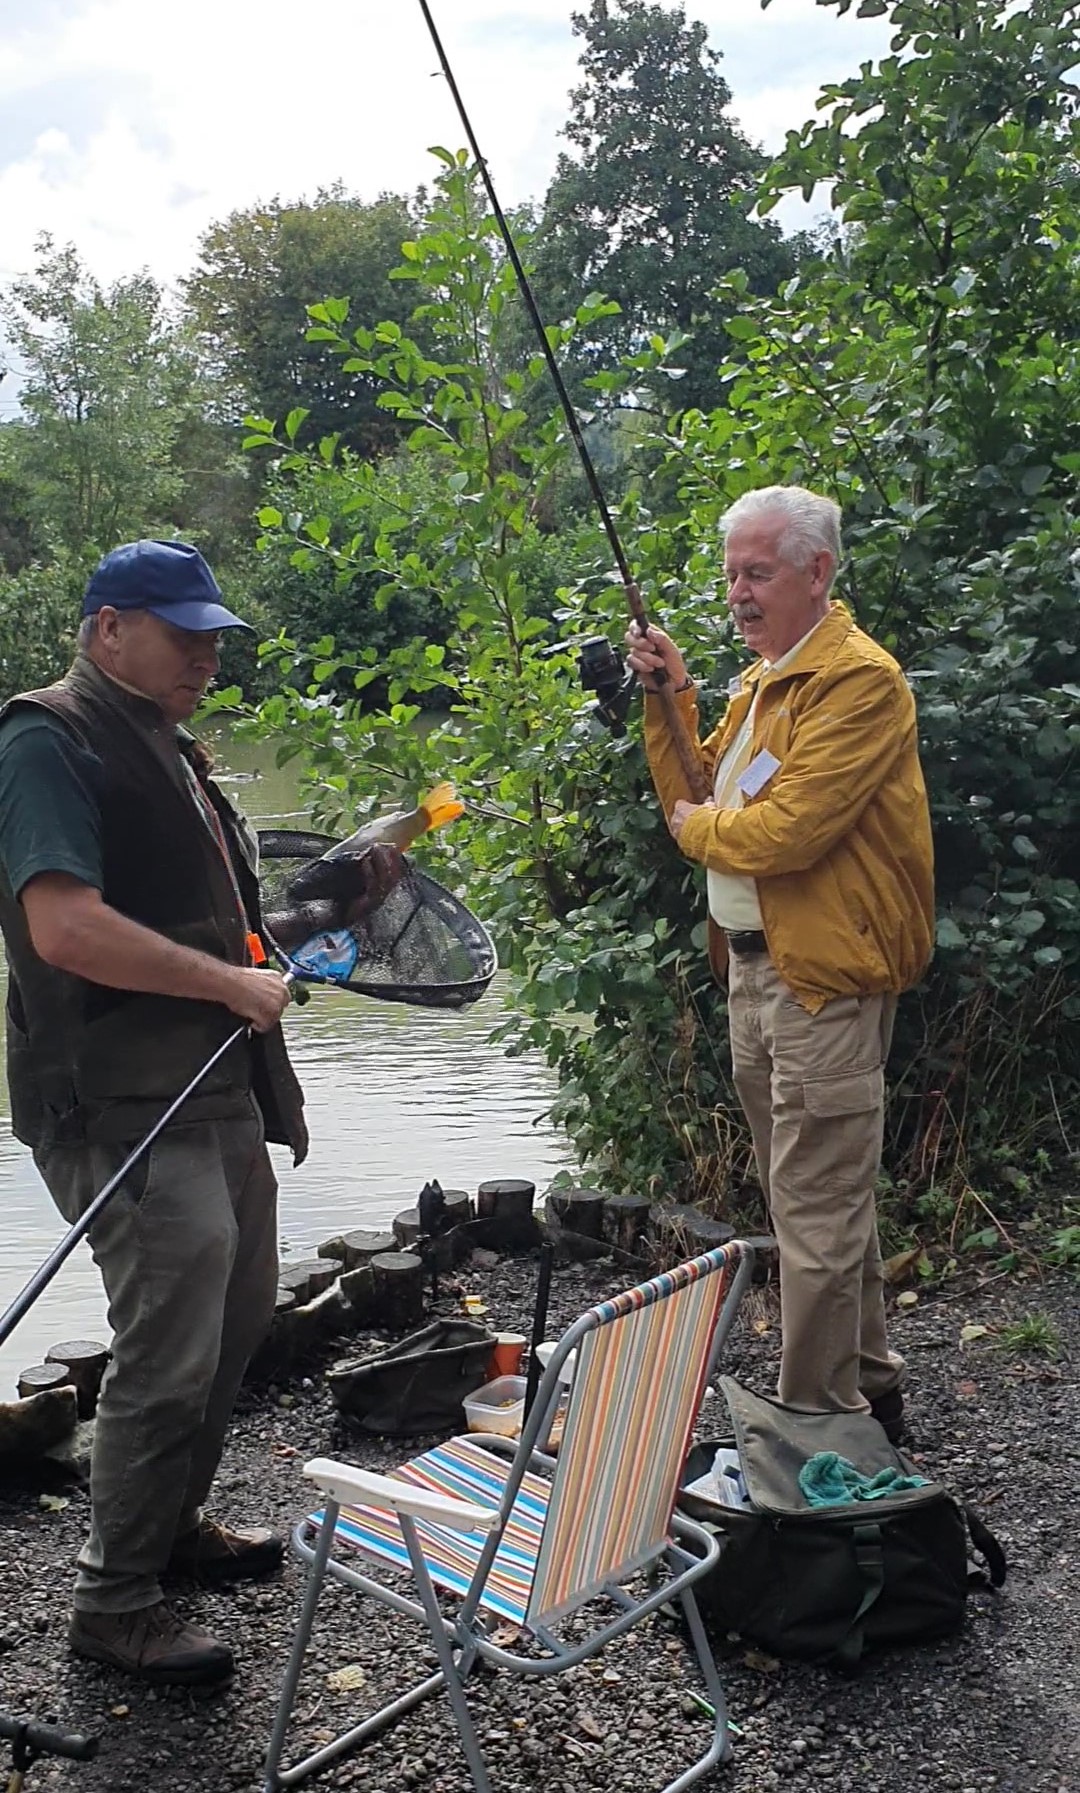 The PGM lands a catch, picture of PGM catching a fish